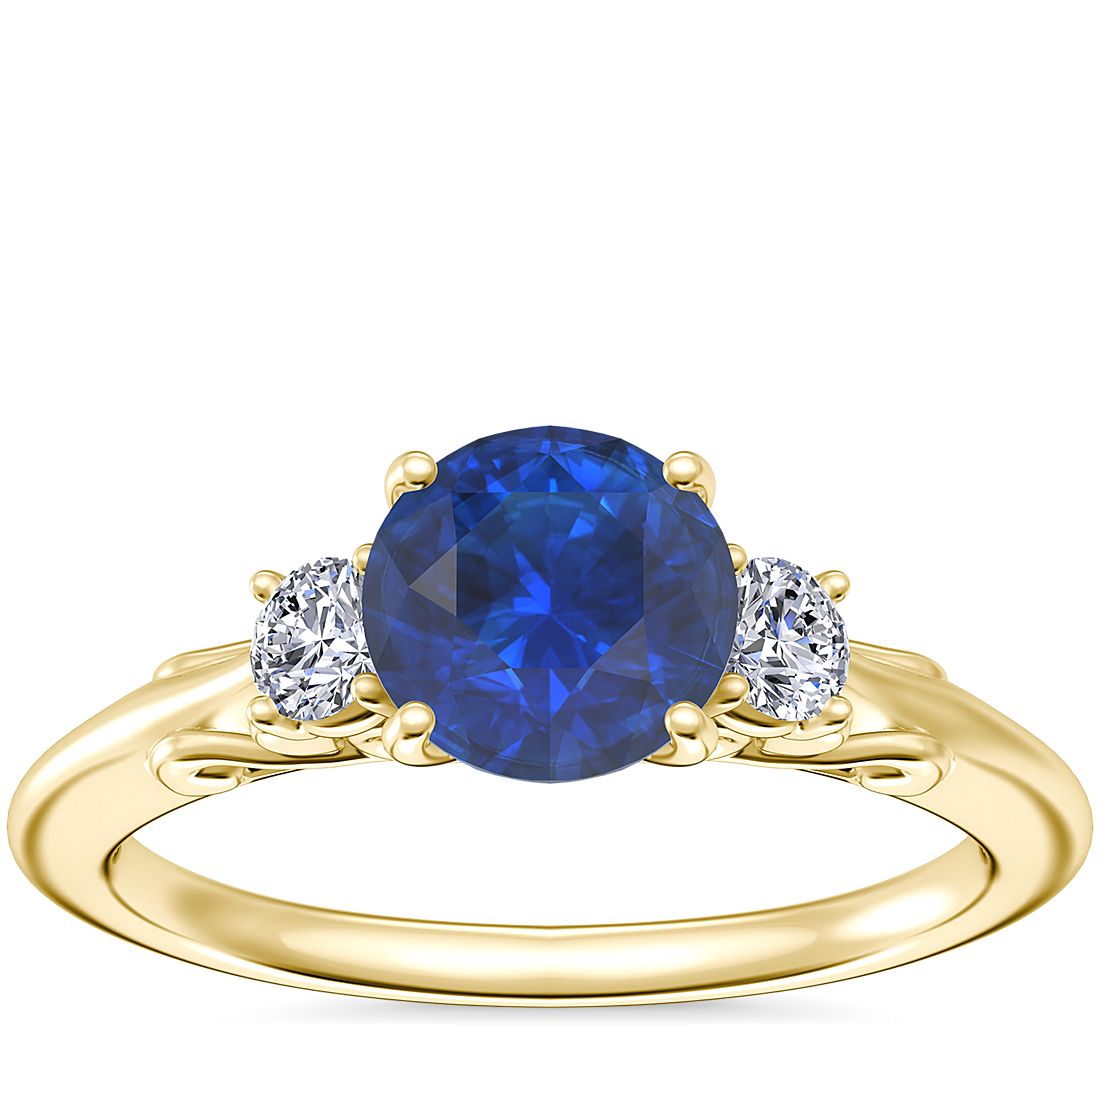 Vintage Three Stone Engagement Ring with Round Sapphire in 14k Yellow Gold (6mm)